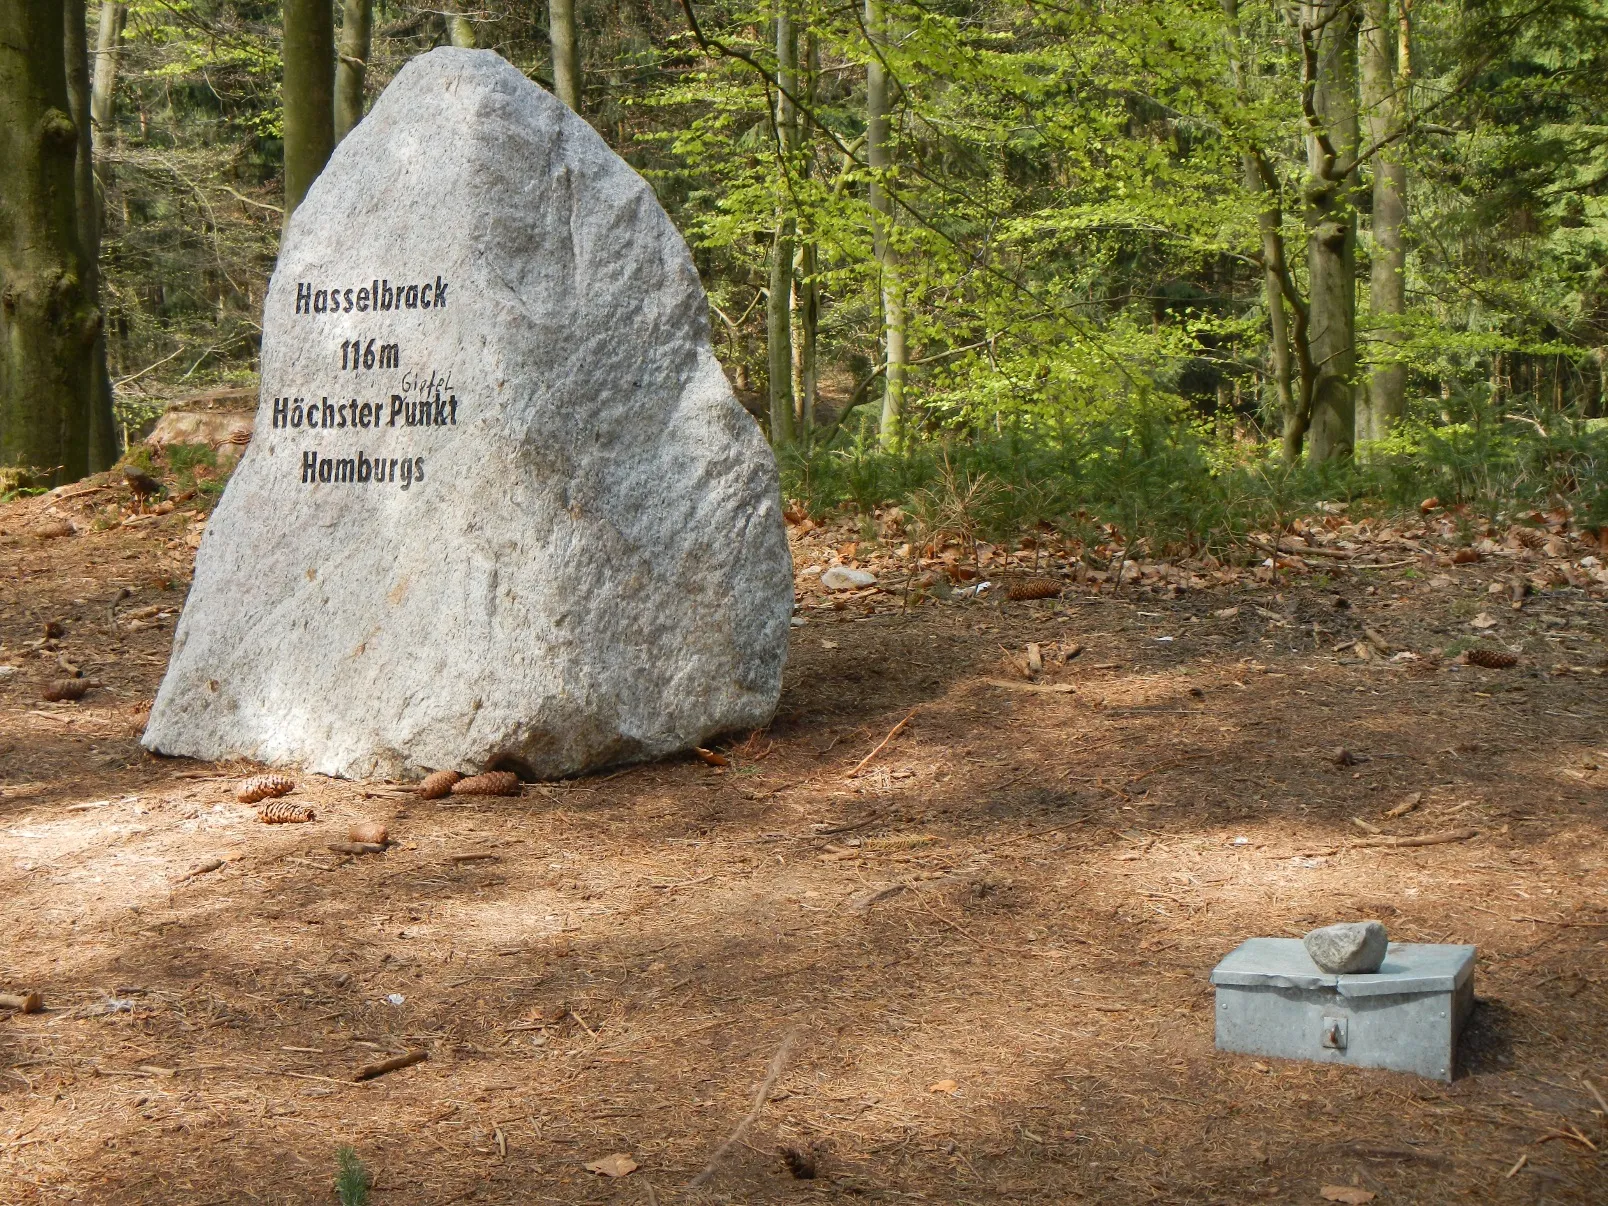 Photo showing: The highest point in the Federal State of Hamburg: Hasselbrack summit cross and geocache (front right). The stone was erected in 2013. The inscription reads: "Hasselbrack/116m/Höchster Punkt/Hamburgs" (Hasselbrack/116m/Highest point/in Hamburg".